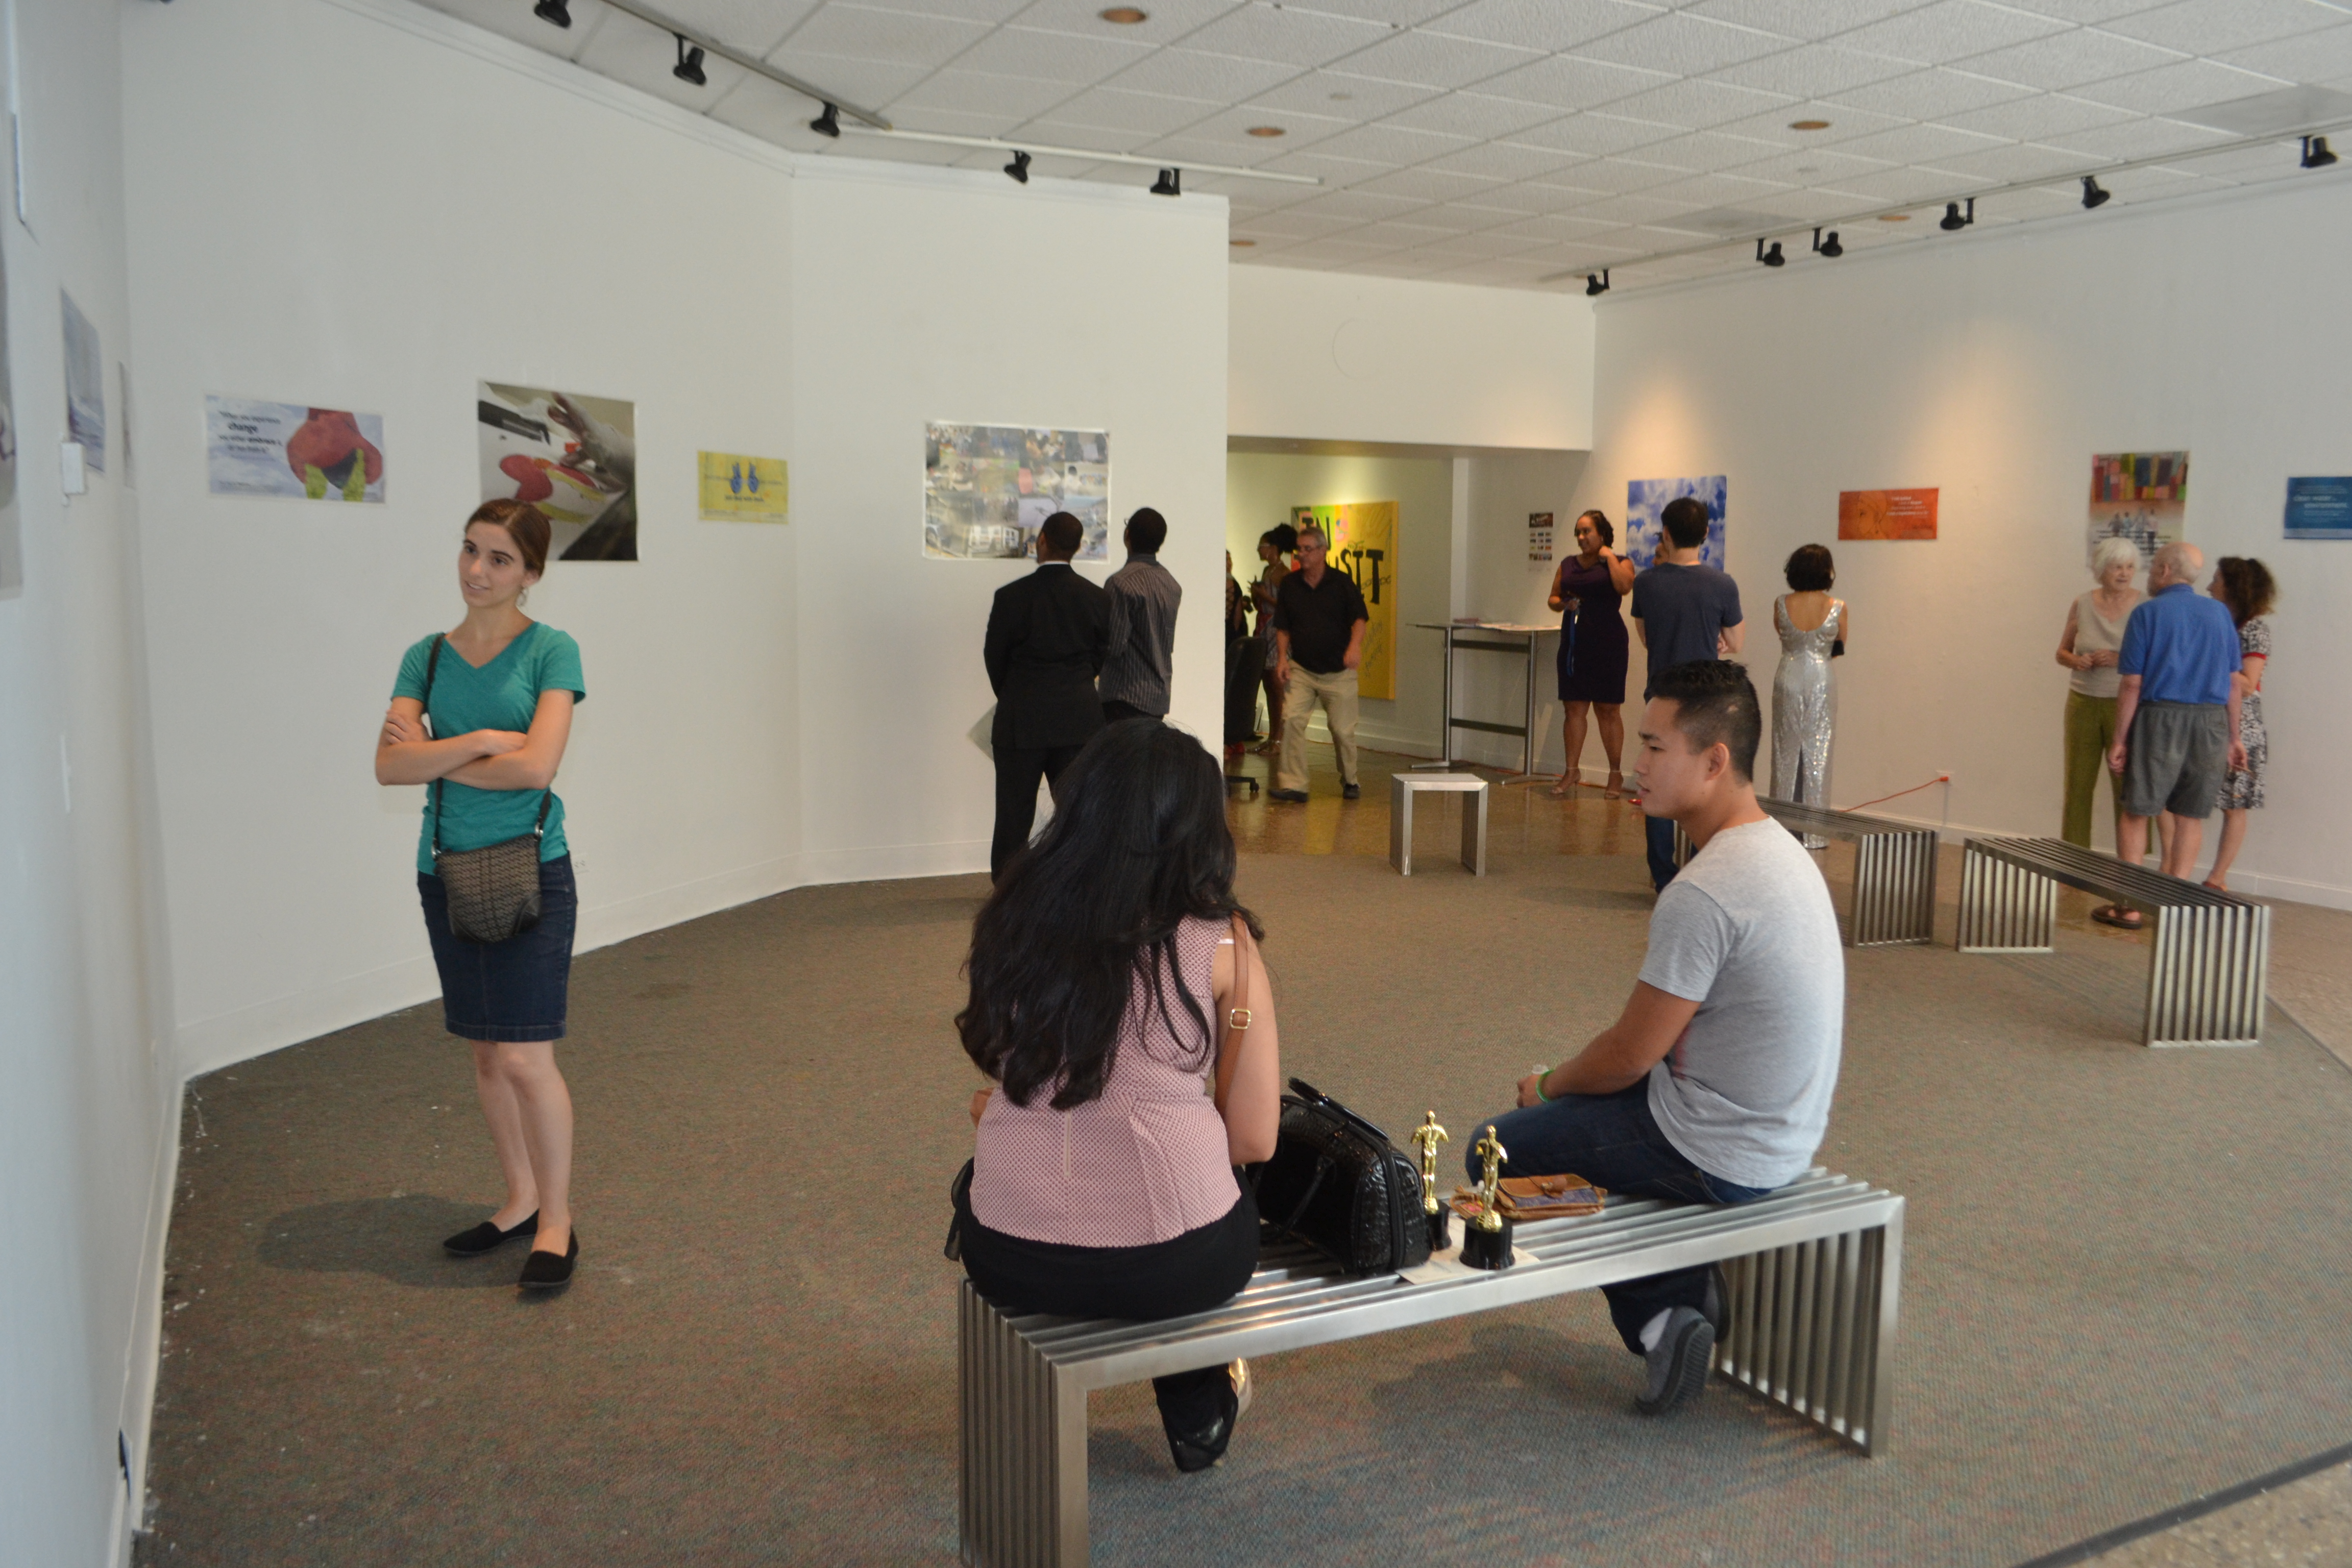 Visitors view posters in the Harbor Gallery. Photo by Colleen Locke.